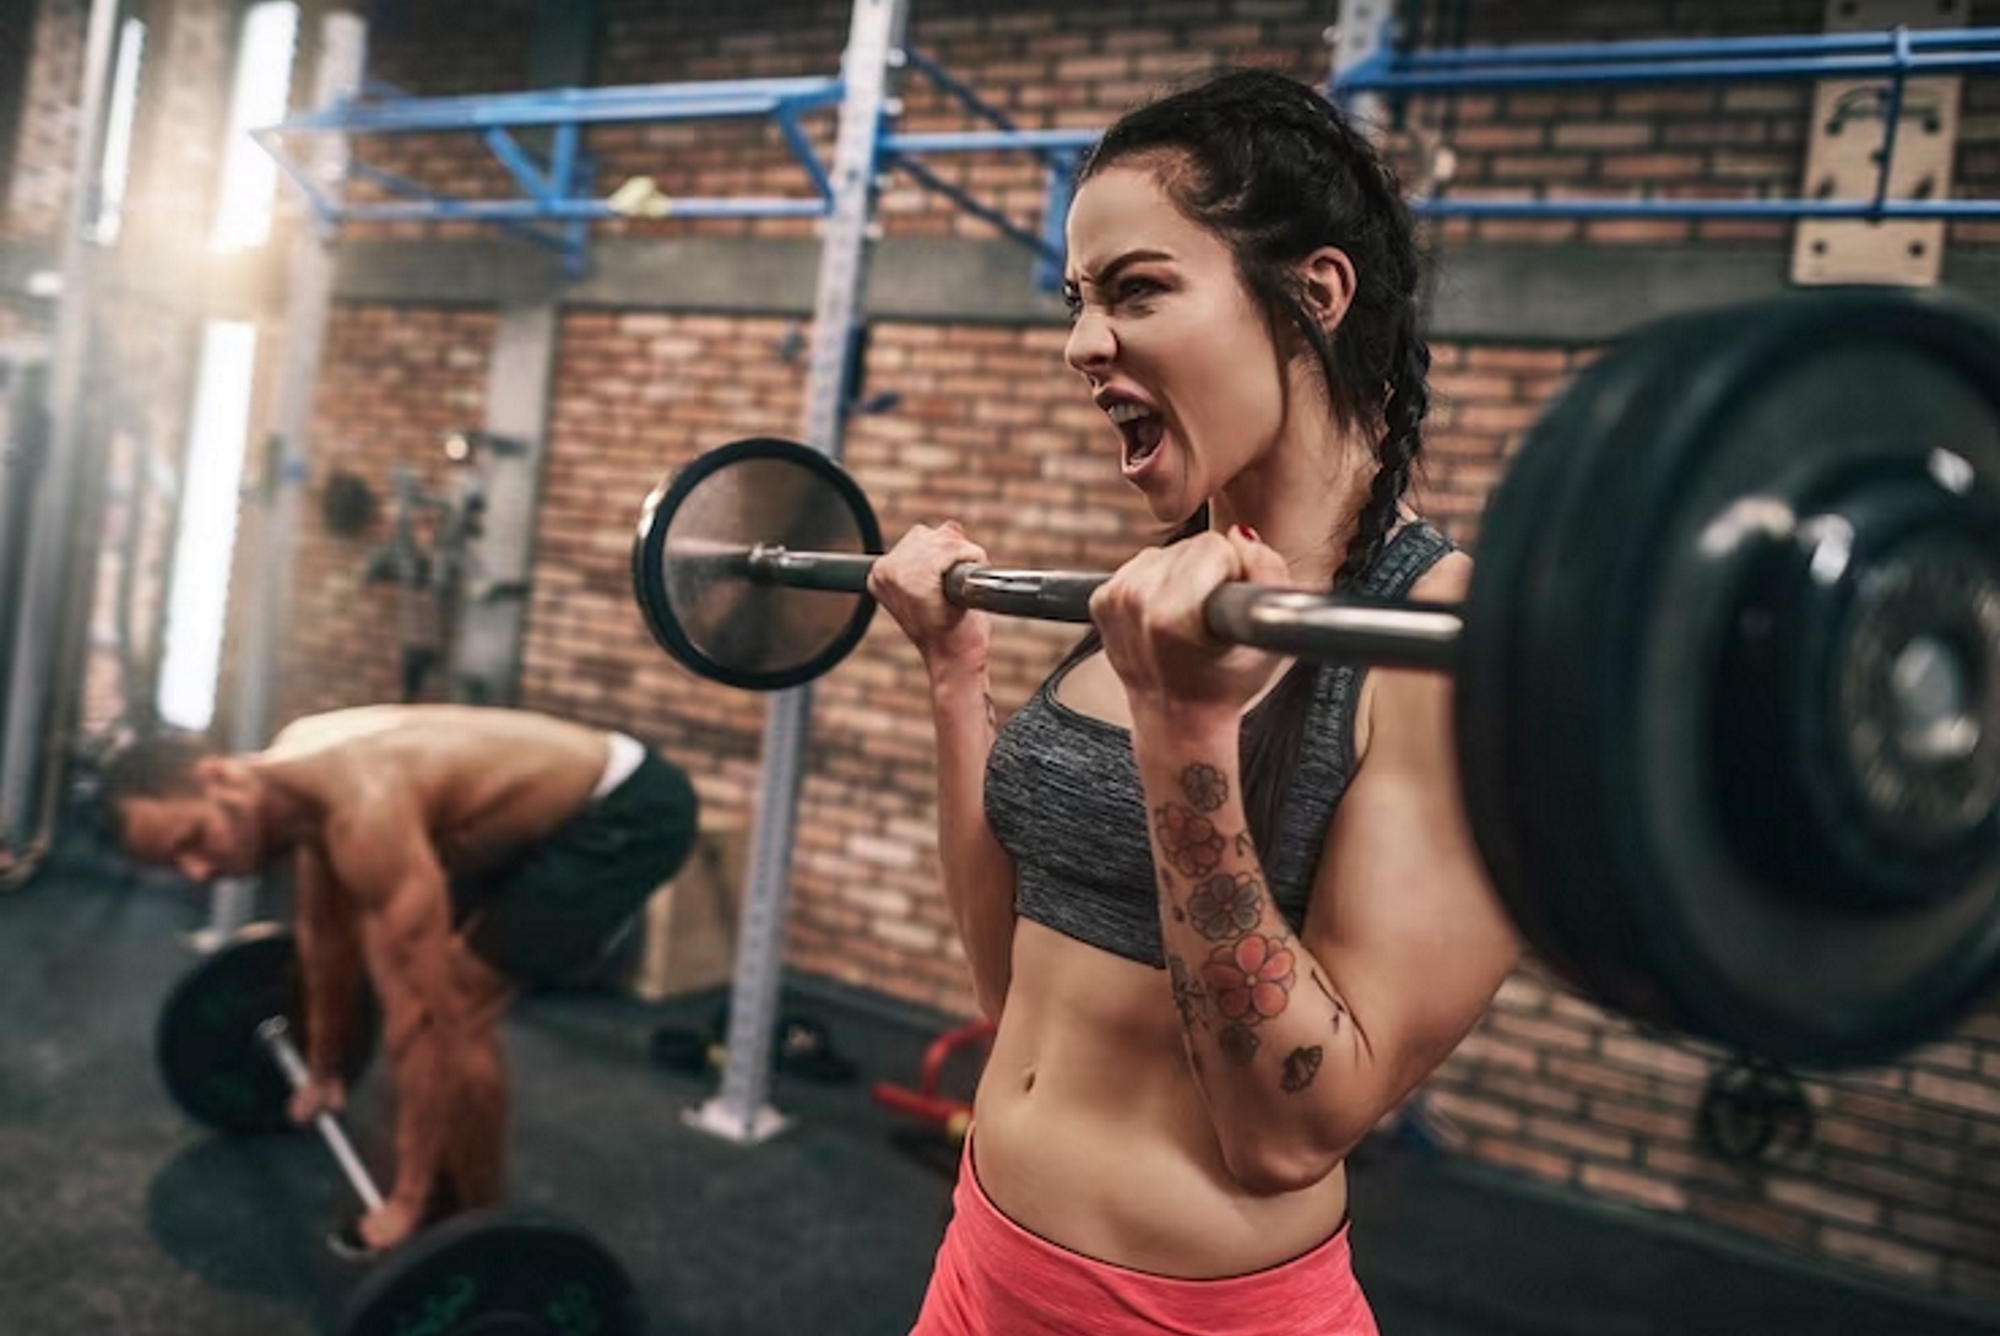 A woman and a man weight training with barbells